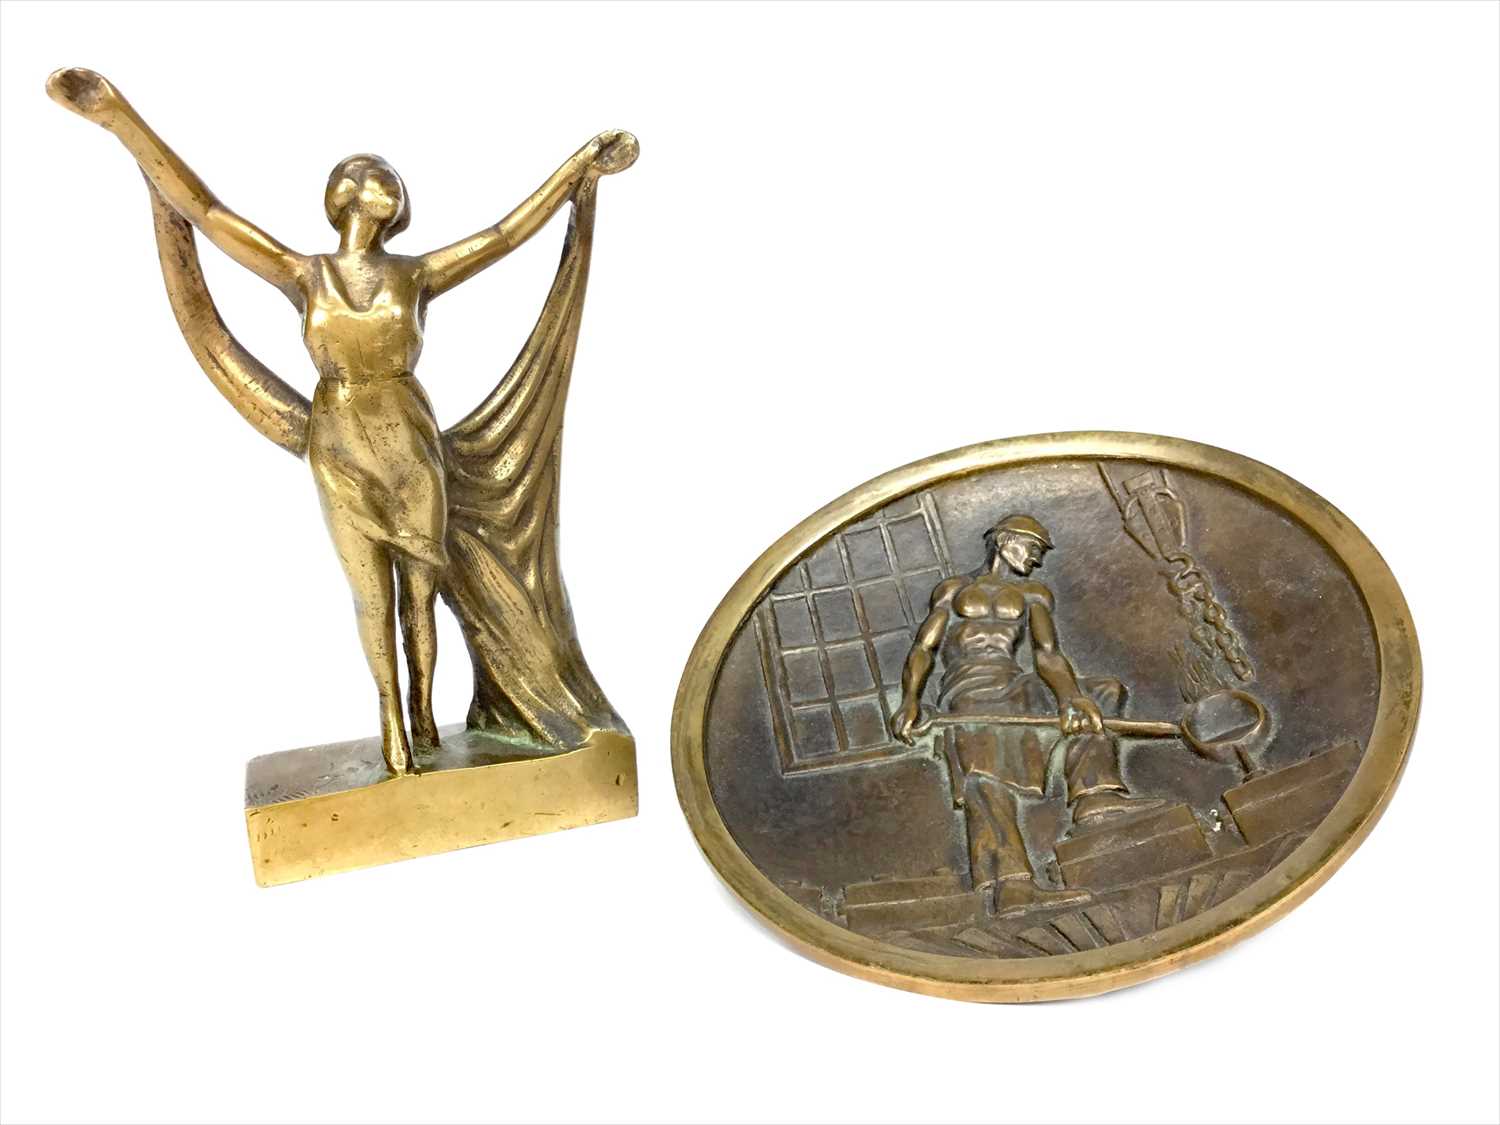 Lot 1611 - AN ART DECO STYLE BRONZE FIGURE AND A PLAQUE